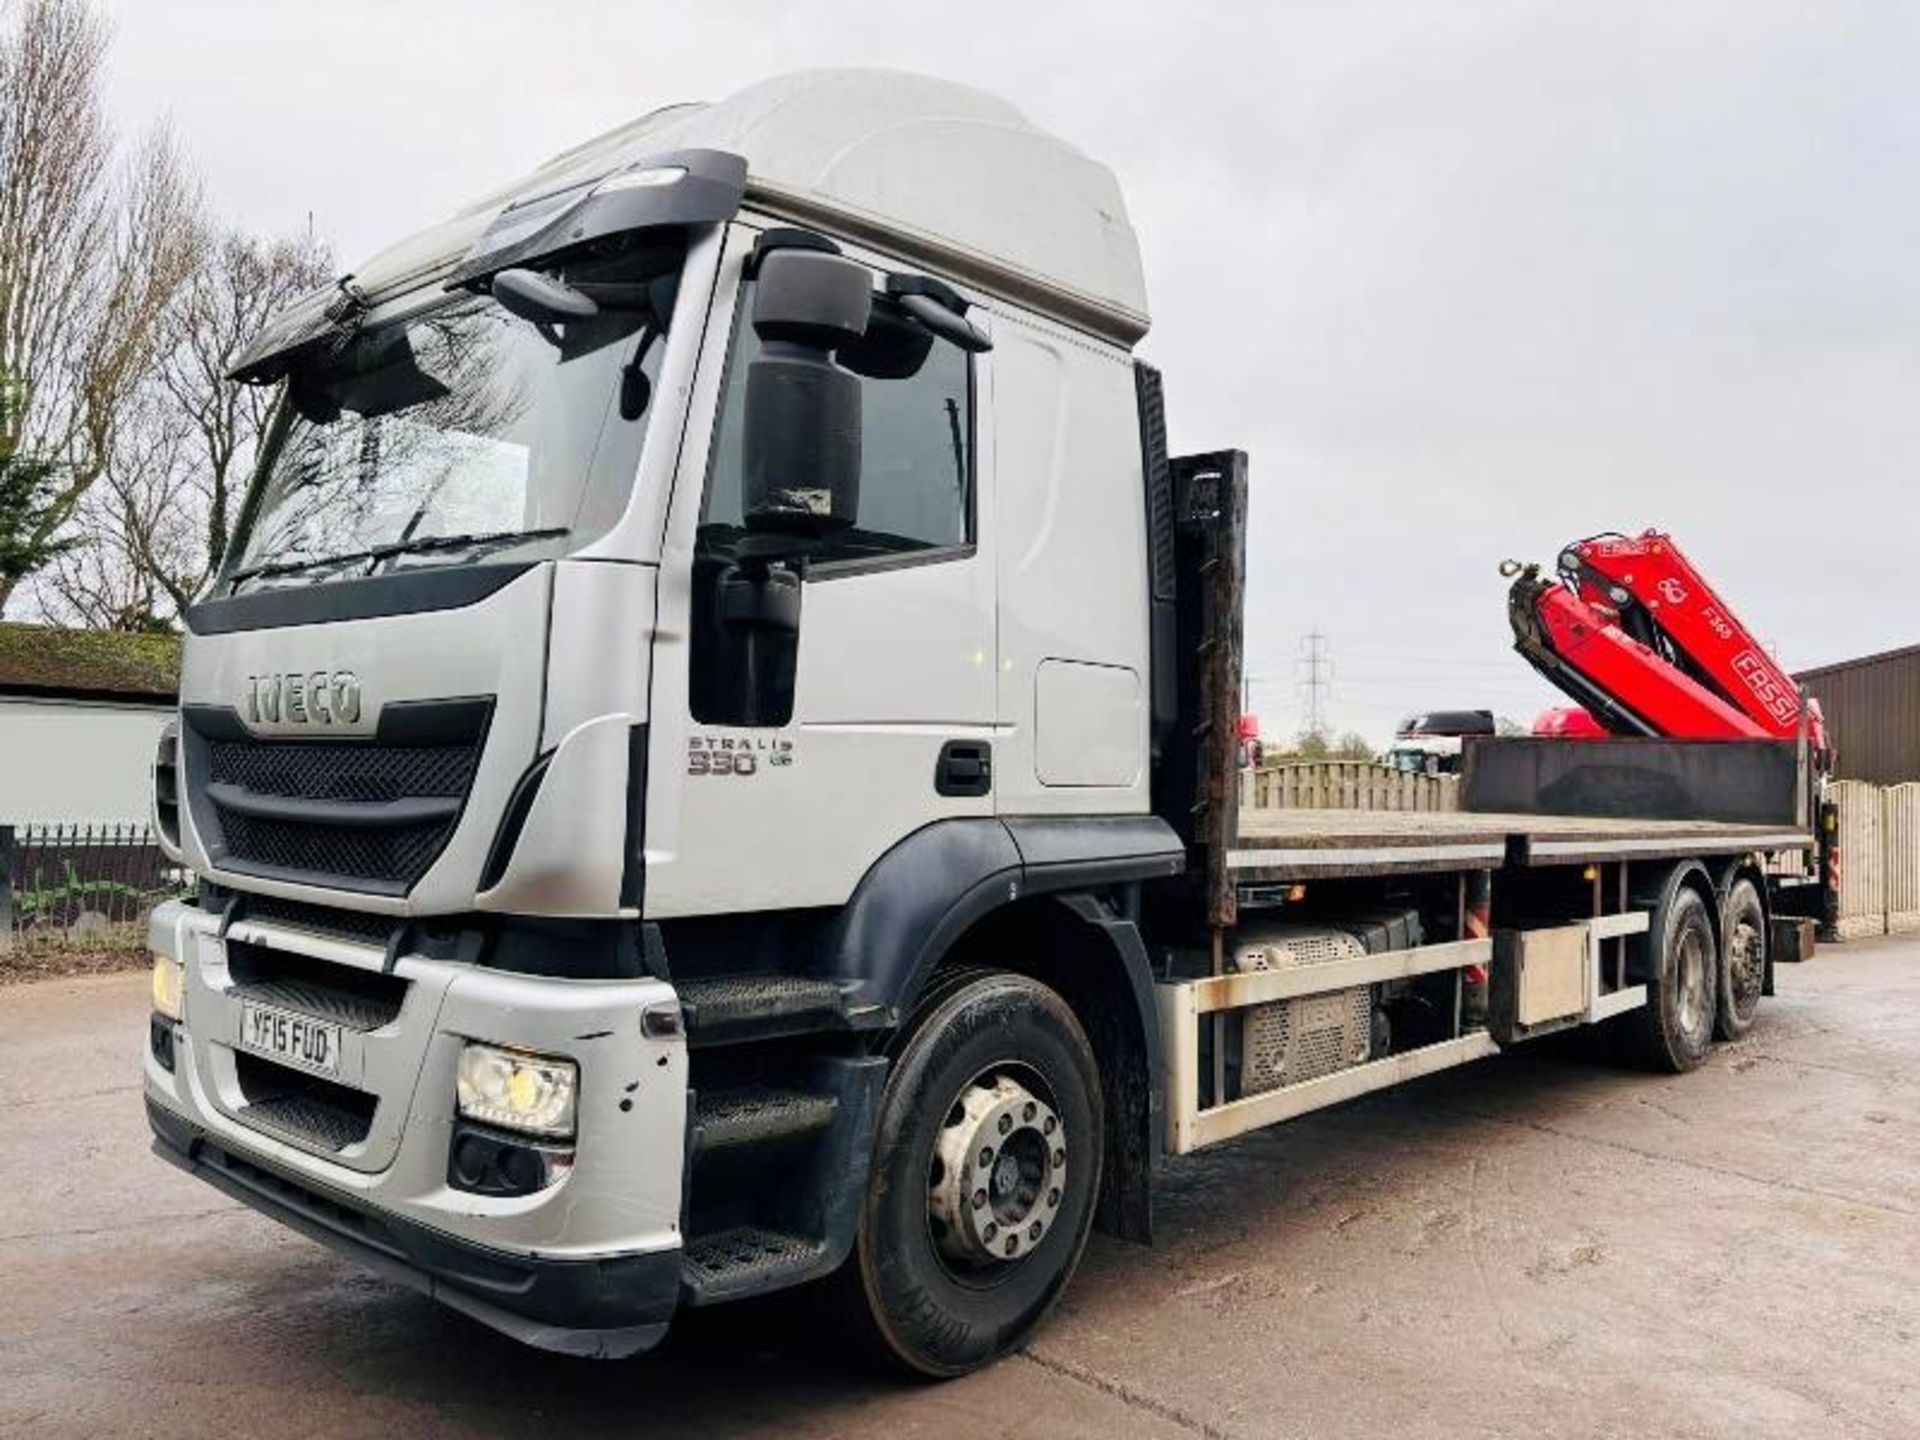 IVECO STRALIS 330E6 HIGHWAY SLEEPER 6X2 *YEAR 2015, CRANE NOT INCLUDED* - Image 15 of 16